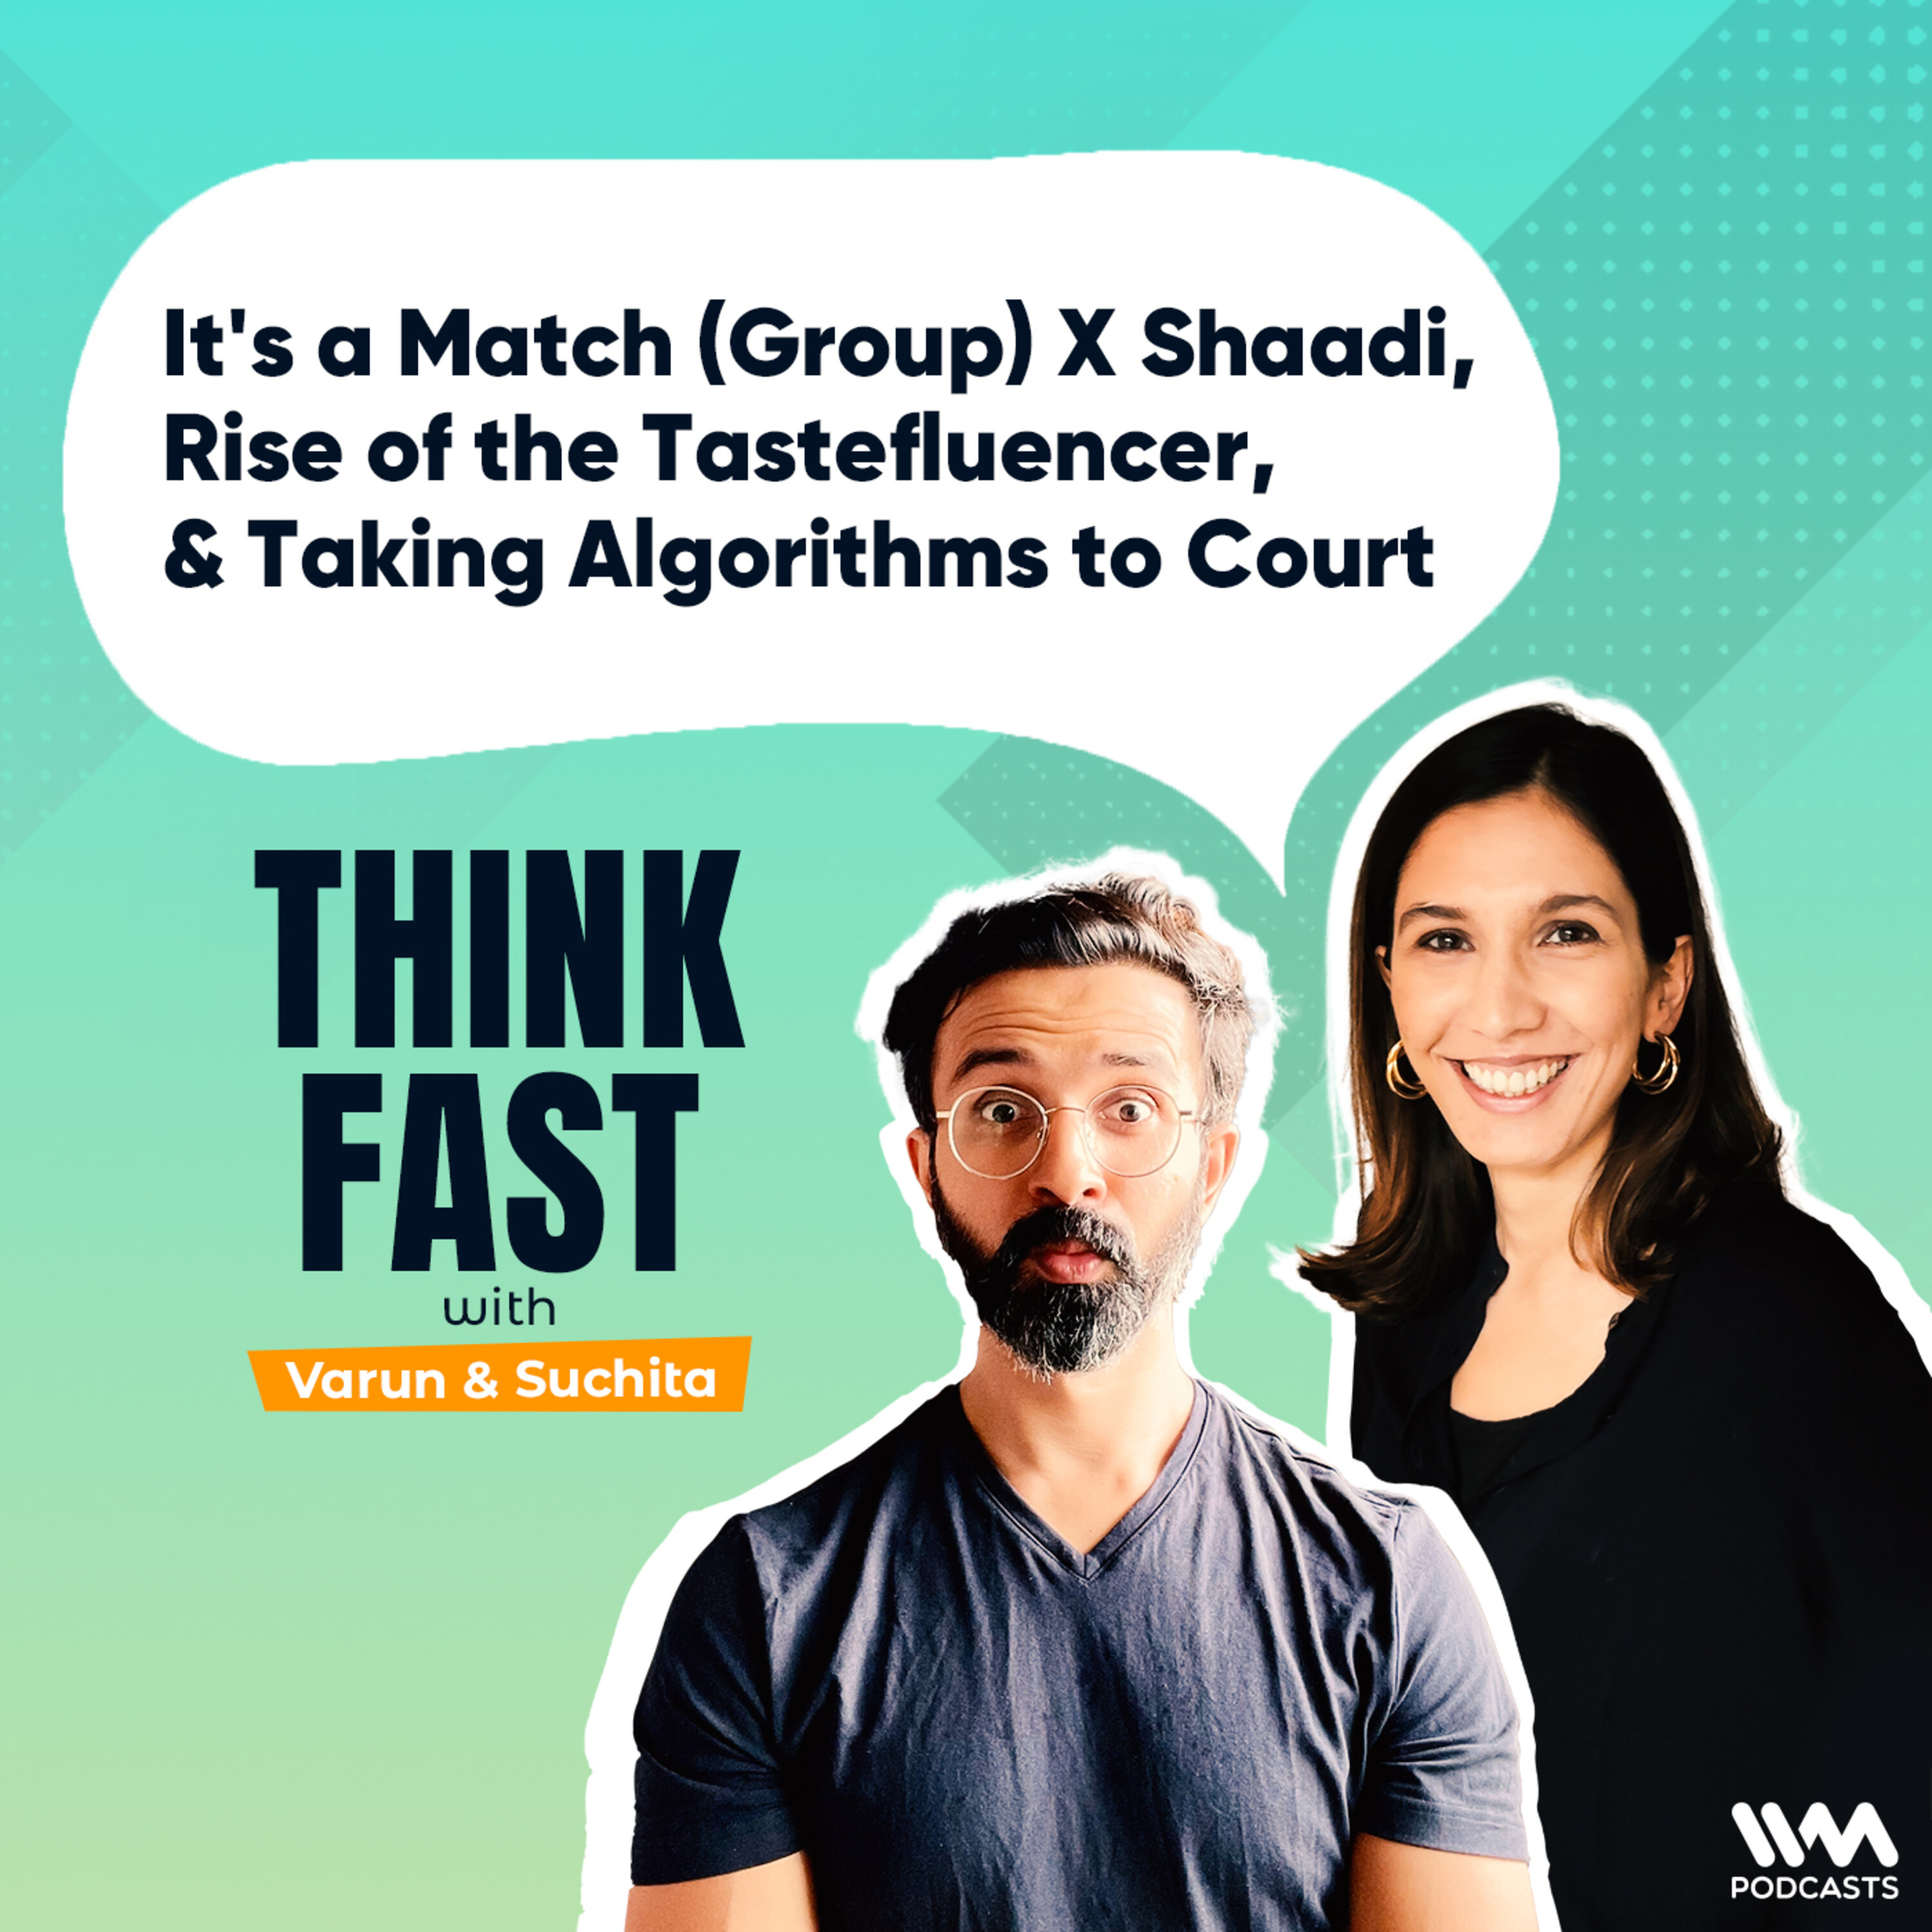 It’s a Match (group) X Shaadi, Rise of the Tastefluencer, & Taking Algorithms to Court